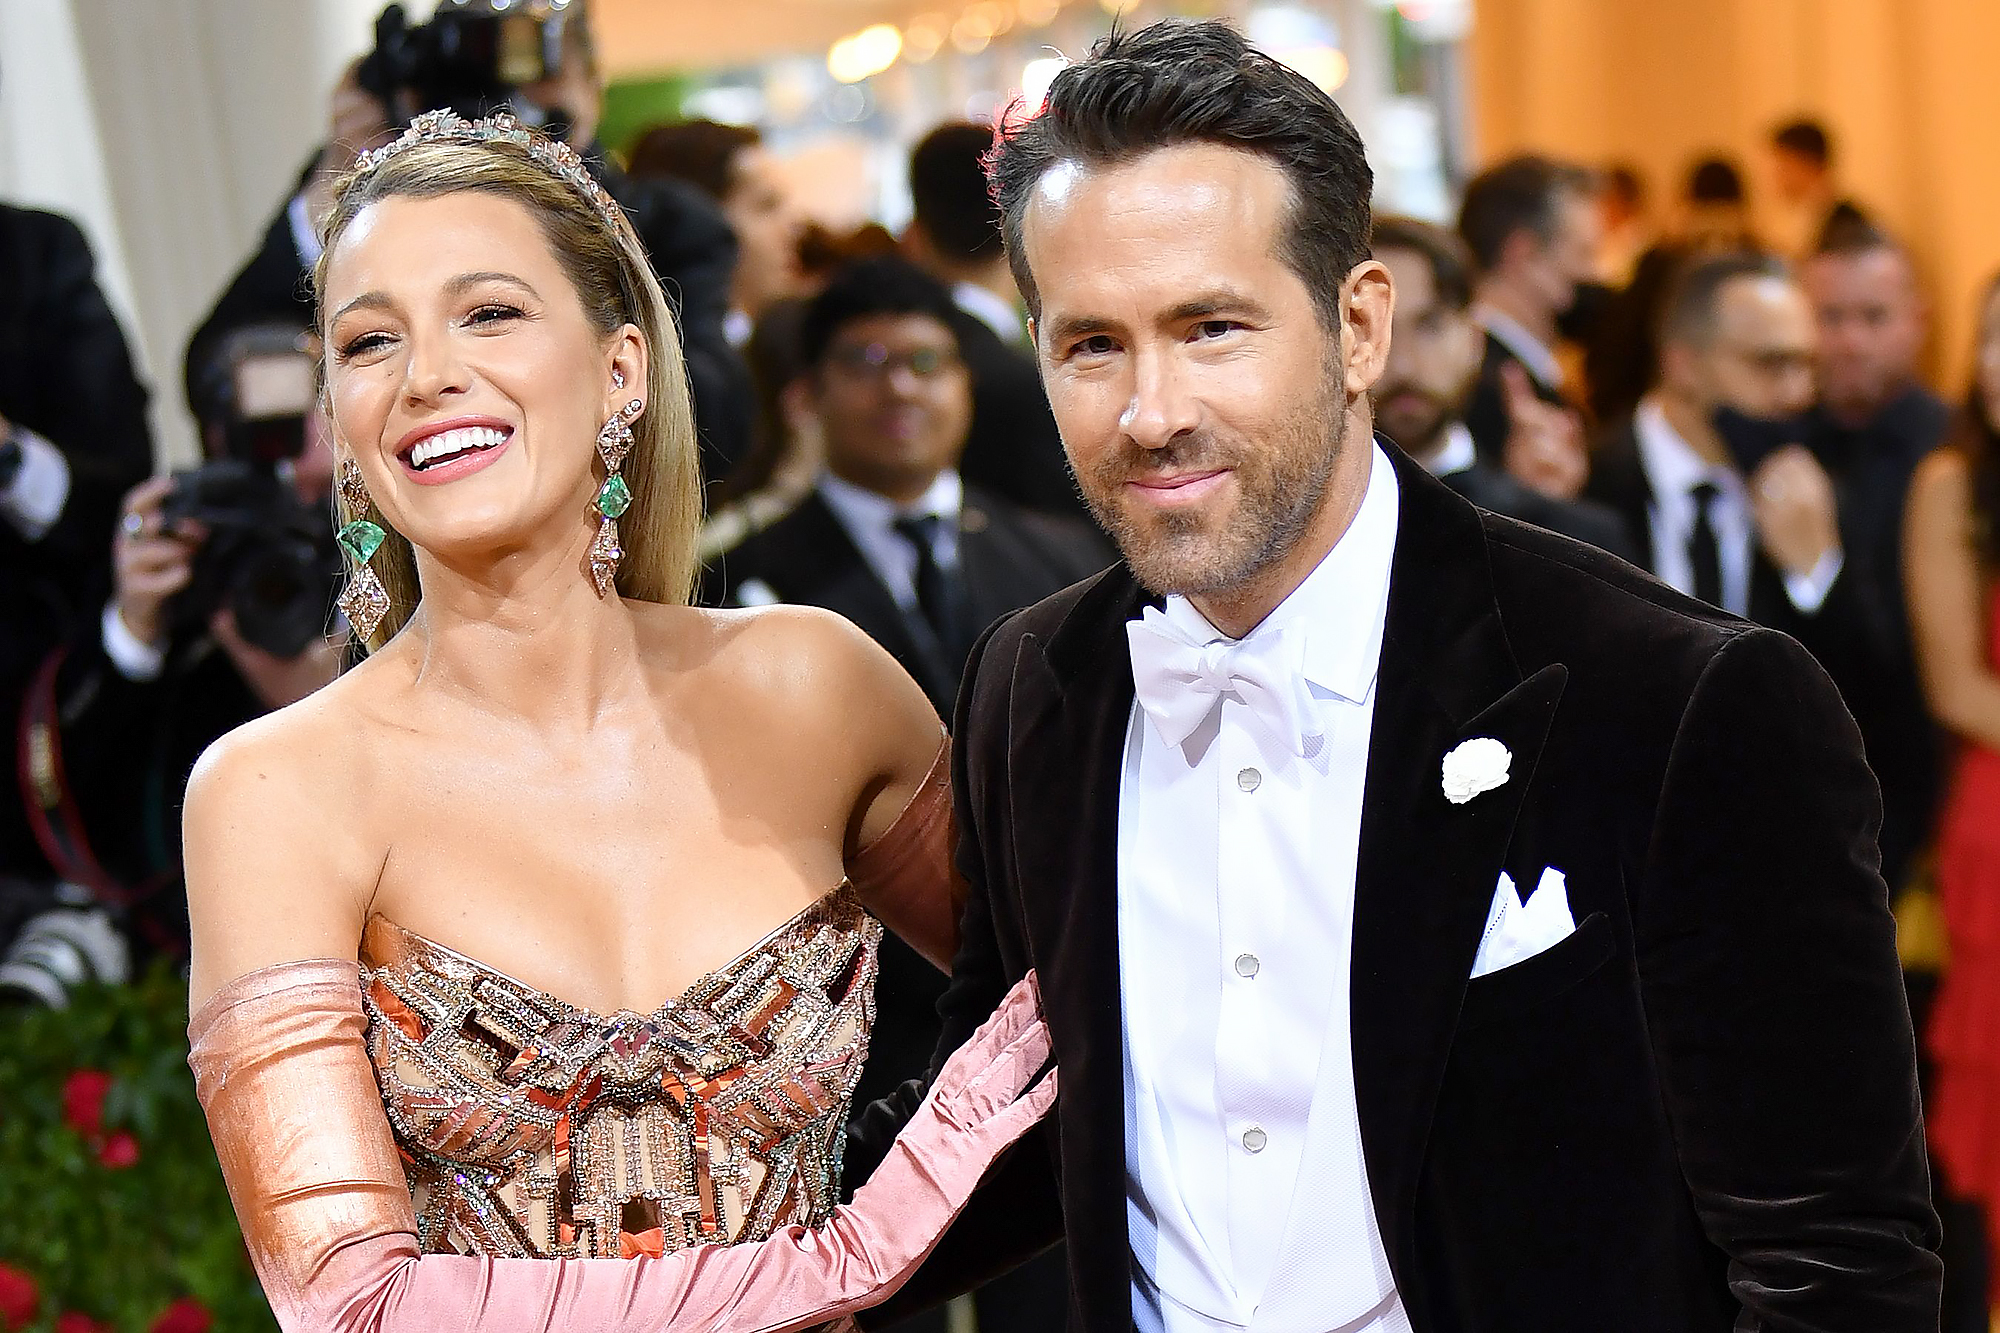 https://www.usmagazine.com/wp-content/uploads/2023/05/Ryan-Reynolds-Says-Hes-Thrilled-About-Welcoming-Baby-No4-Addresses-Wife-Blake-Livelys-2023-Met-Gala-Absence.jpg?quality=86&strip=all